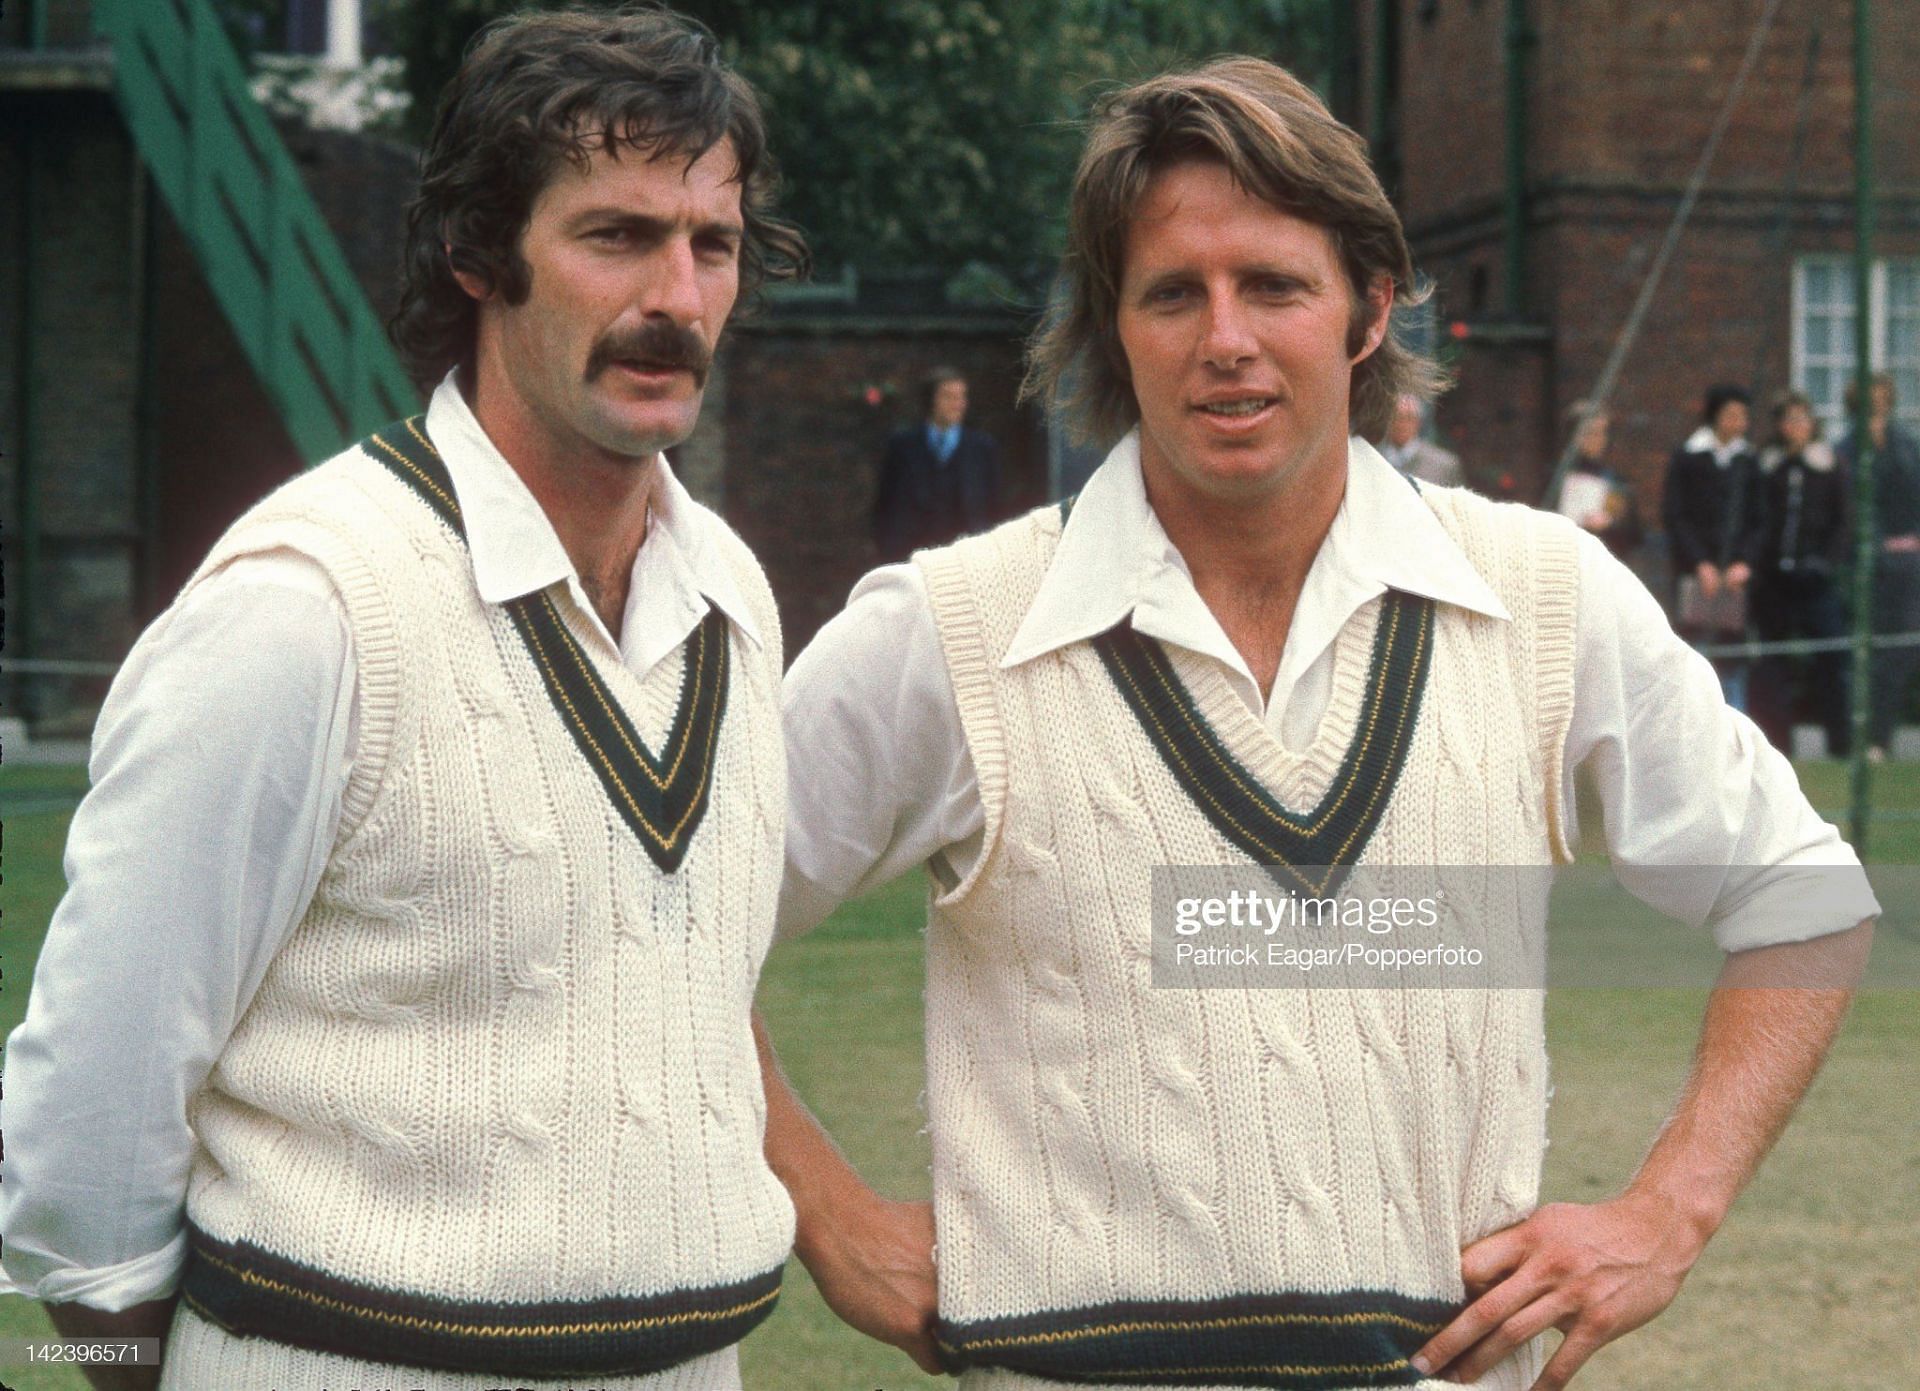 Dennis Lillee (Left) and Jeff Thomson (Right)